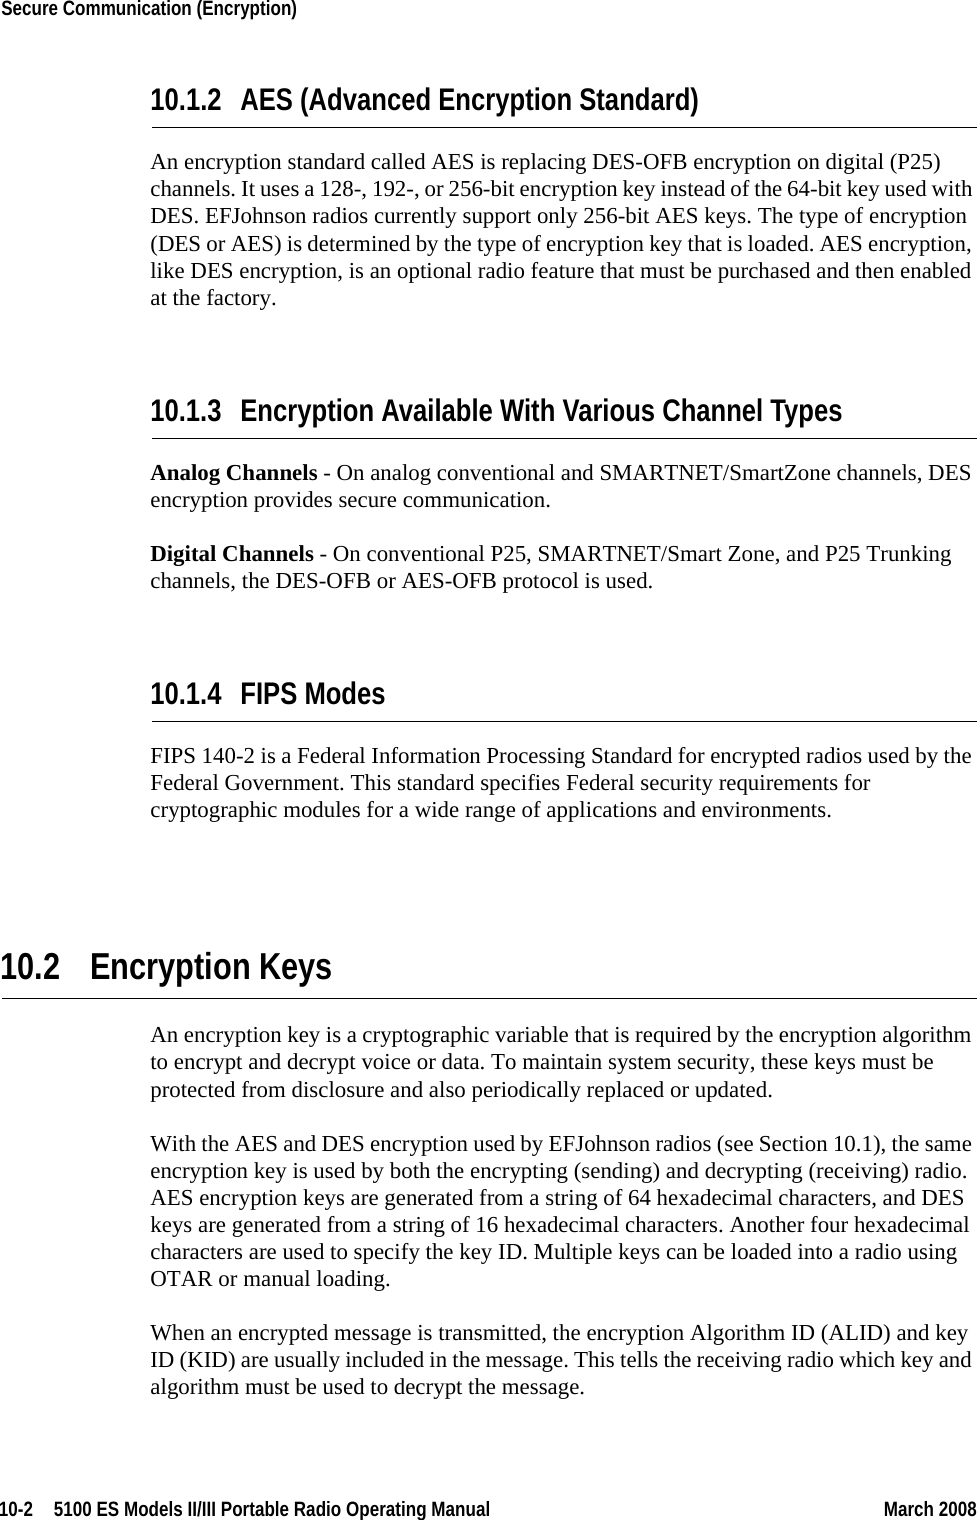 10-2  5100 ES Models II/III Portable Radio Operating Manual March 2008Secure Communication (Encryption) 10.1.2 AES (Advanced Encryption Standard)An encryption standard called AES is replacing DES-OFB encryption on digital (P25) channels. It uses a 128-, 192-, or 256-bit encryption key instead of the 64-bit key used with DES. EFJohnson radios currently support only 256-bit AES keys. The type of encryption (DES or AES) is determined by the type of encryption key that is loaded. AES encryption, like DES encryption, is an optional radio feature that must be purchased and then enabled at the factory.10.1.3 Encryption Available With Various Channel TypesAnalog Channels - On analog conventional and SMARTNET/SmartZone channels, DES encryption provides secure communication.Digital Channels - On conventional P25, SMARTNET/Smart Zone, and P25 Trunking channels, the DES-OFB or AES-OFB protocol is used.10.1.4 FIPS ModesFIPS 140-2 is a Federal Information Processing Standard for encrypted radios used by the Federal Government. This standard specifies Federal security requirements for cryptographic modules for a wide range of applications and environments.10.2 Encryption KeysAn encryption key is a cryptographic variable that is required by the encryption algorithm to encrypt and decrypt voice or data. To maintain system security, these keys must be protected from disclosure and also periodically replaced or updated.With the AES and DES encryption used by EFJohnson radios (see Section 10.1), the same encryption key is used by both the encrypting (sending) and decrypting (receiving) radio. AES encryption keys are generated from a string of 64 hexadecimal characters, and DES keys are generated from a string of 16 hexadecimal characters. Another four hexadecimal characters are used to specify the key ID. Multiple keys can be loaded into a radio using OTAR or manual loading.When an encrypted message is transmitted, the encryption Algorithm ID (ALID) and key ID (KID) are usually included in the message. This tells the receiving radio which key and algorithm must be used to decrypt the message.